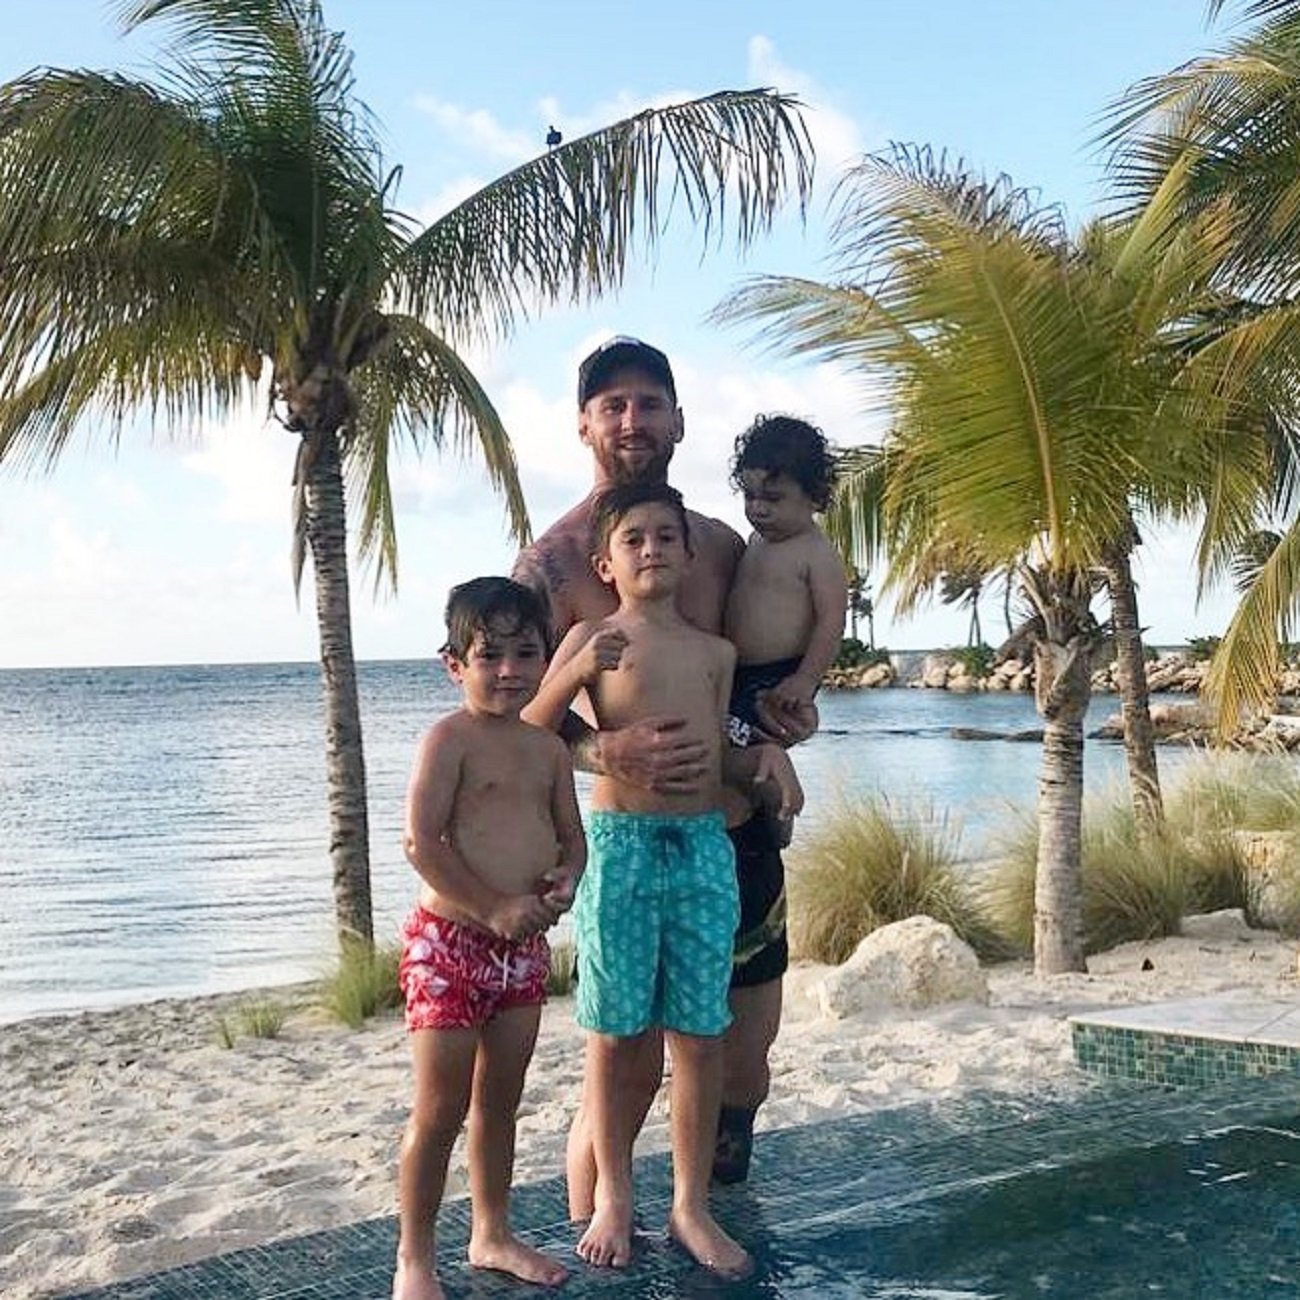 That feeling when: the kids are playing beach football, with some dad called Leo Messi